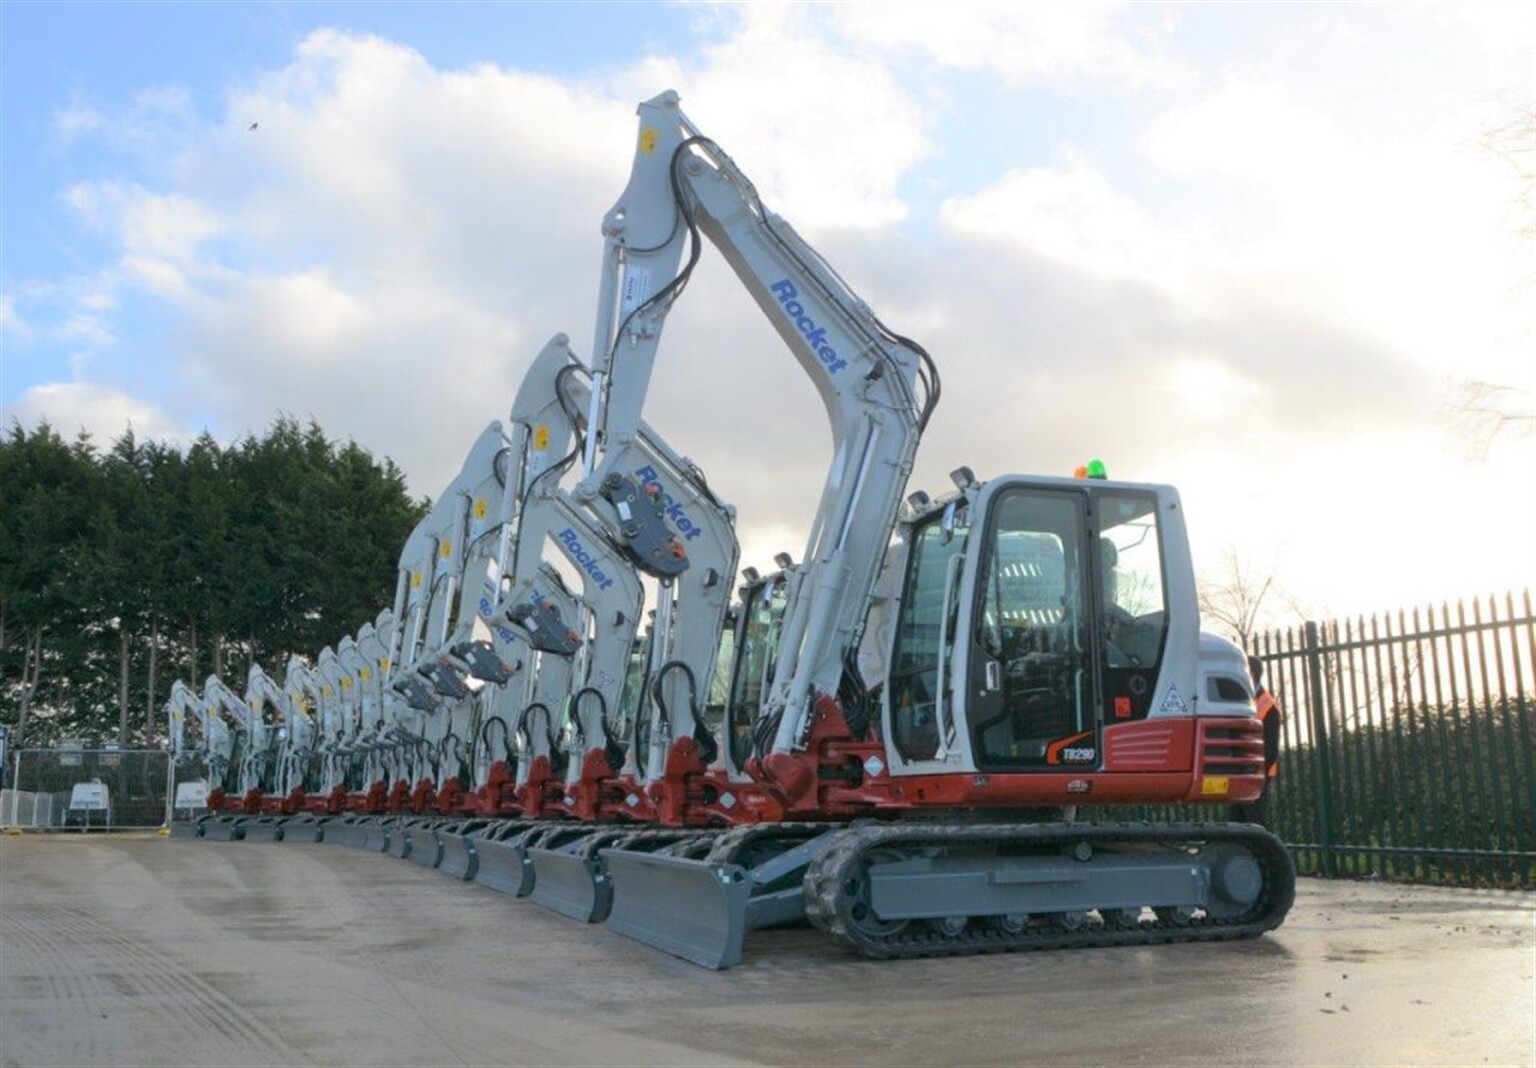 Rocket Rentals launch a new red & grey era with 1.2m Takeuchi deal